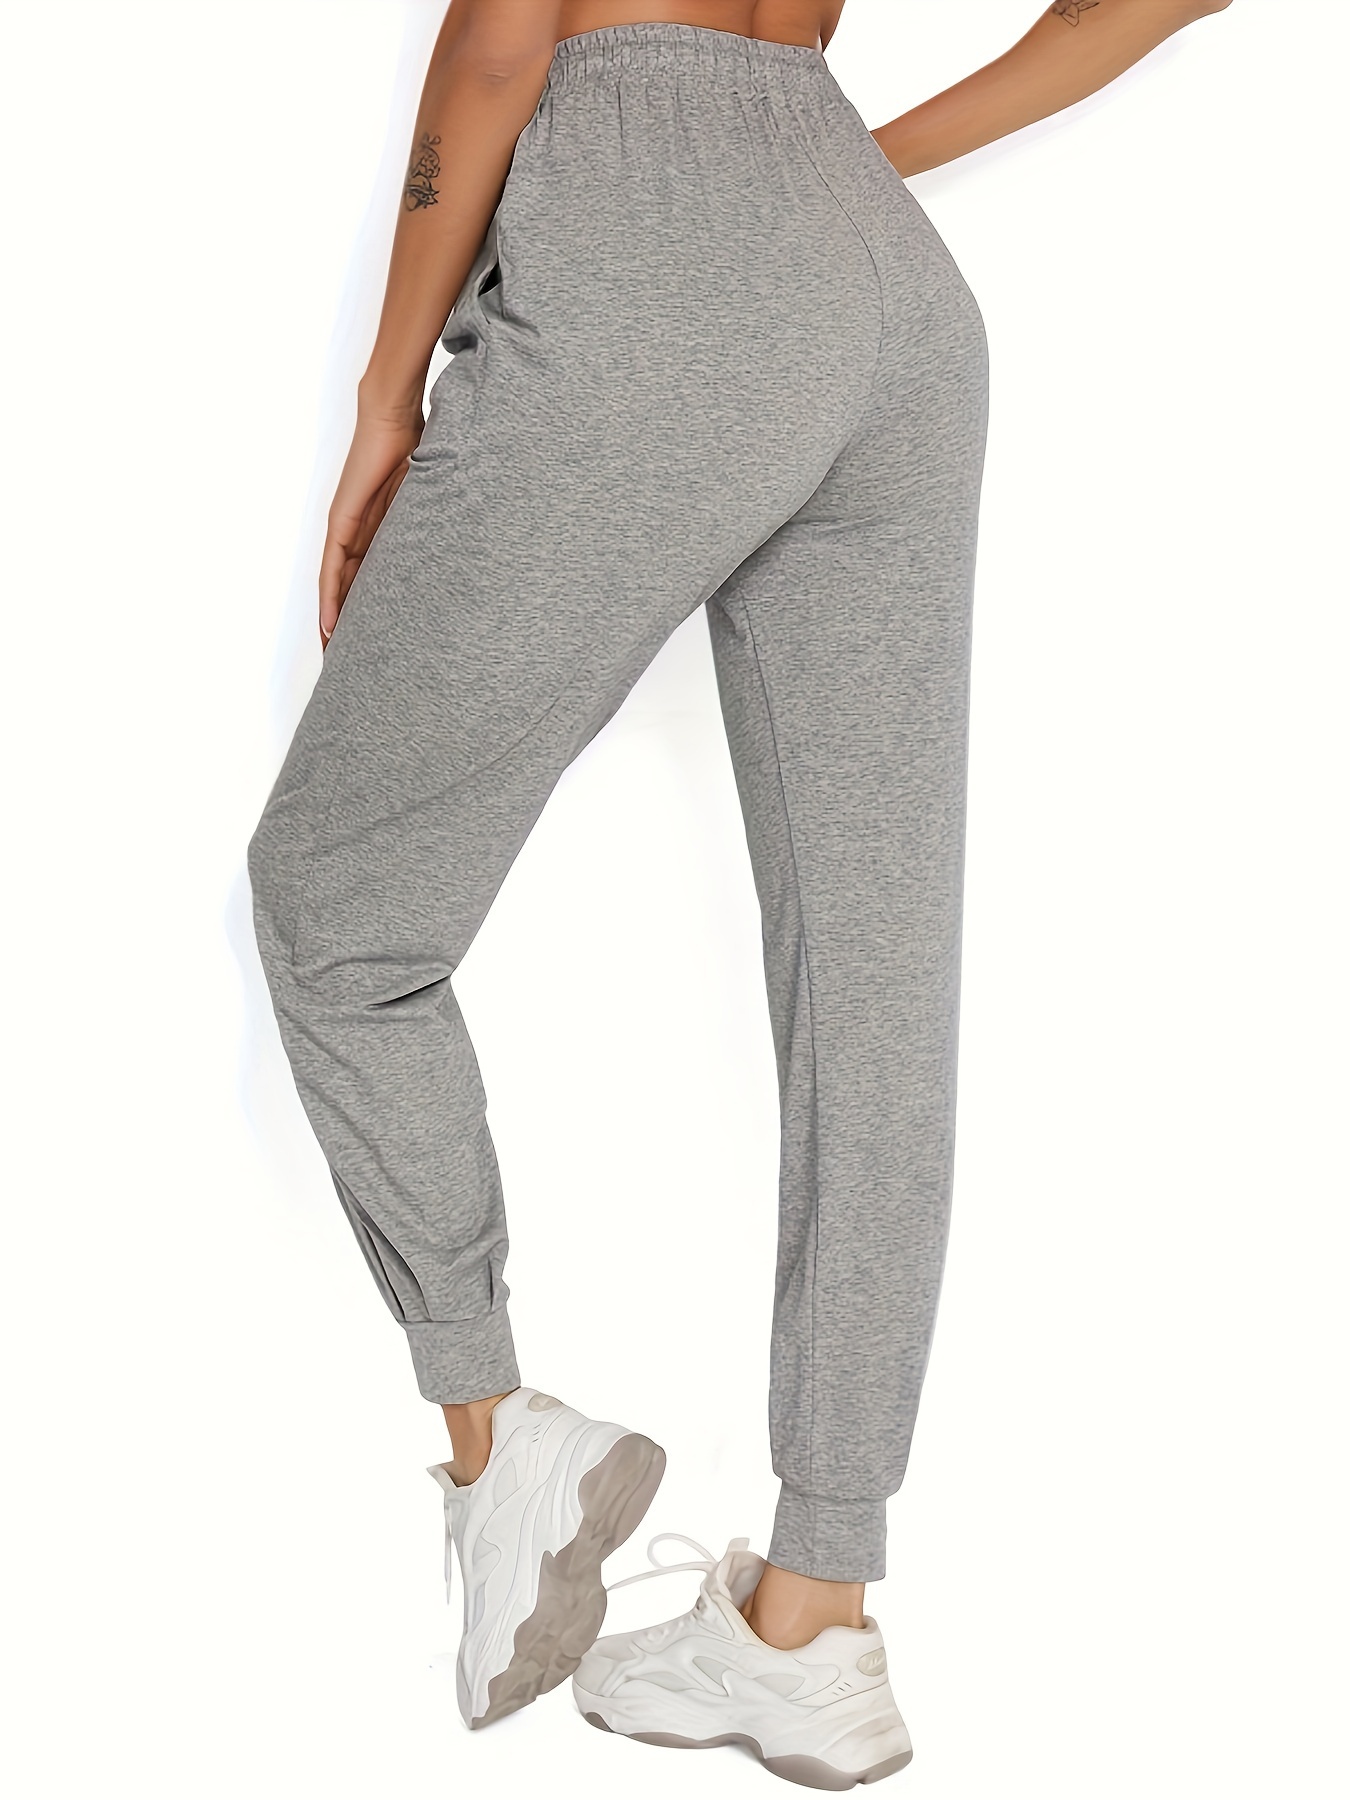 BESTSPR Pant for Women Casual Sports Thick Basic Loose Drawstring Women's  Jogger Yoga Pant 